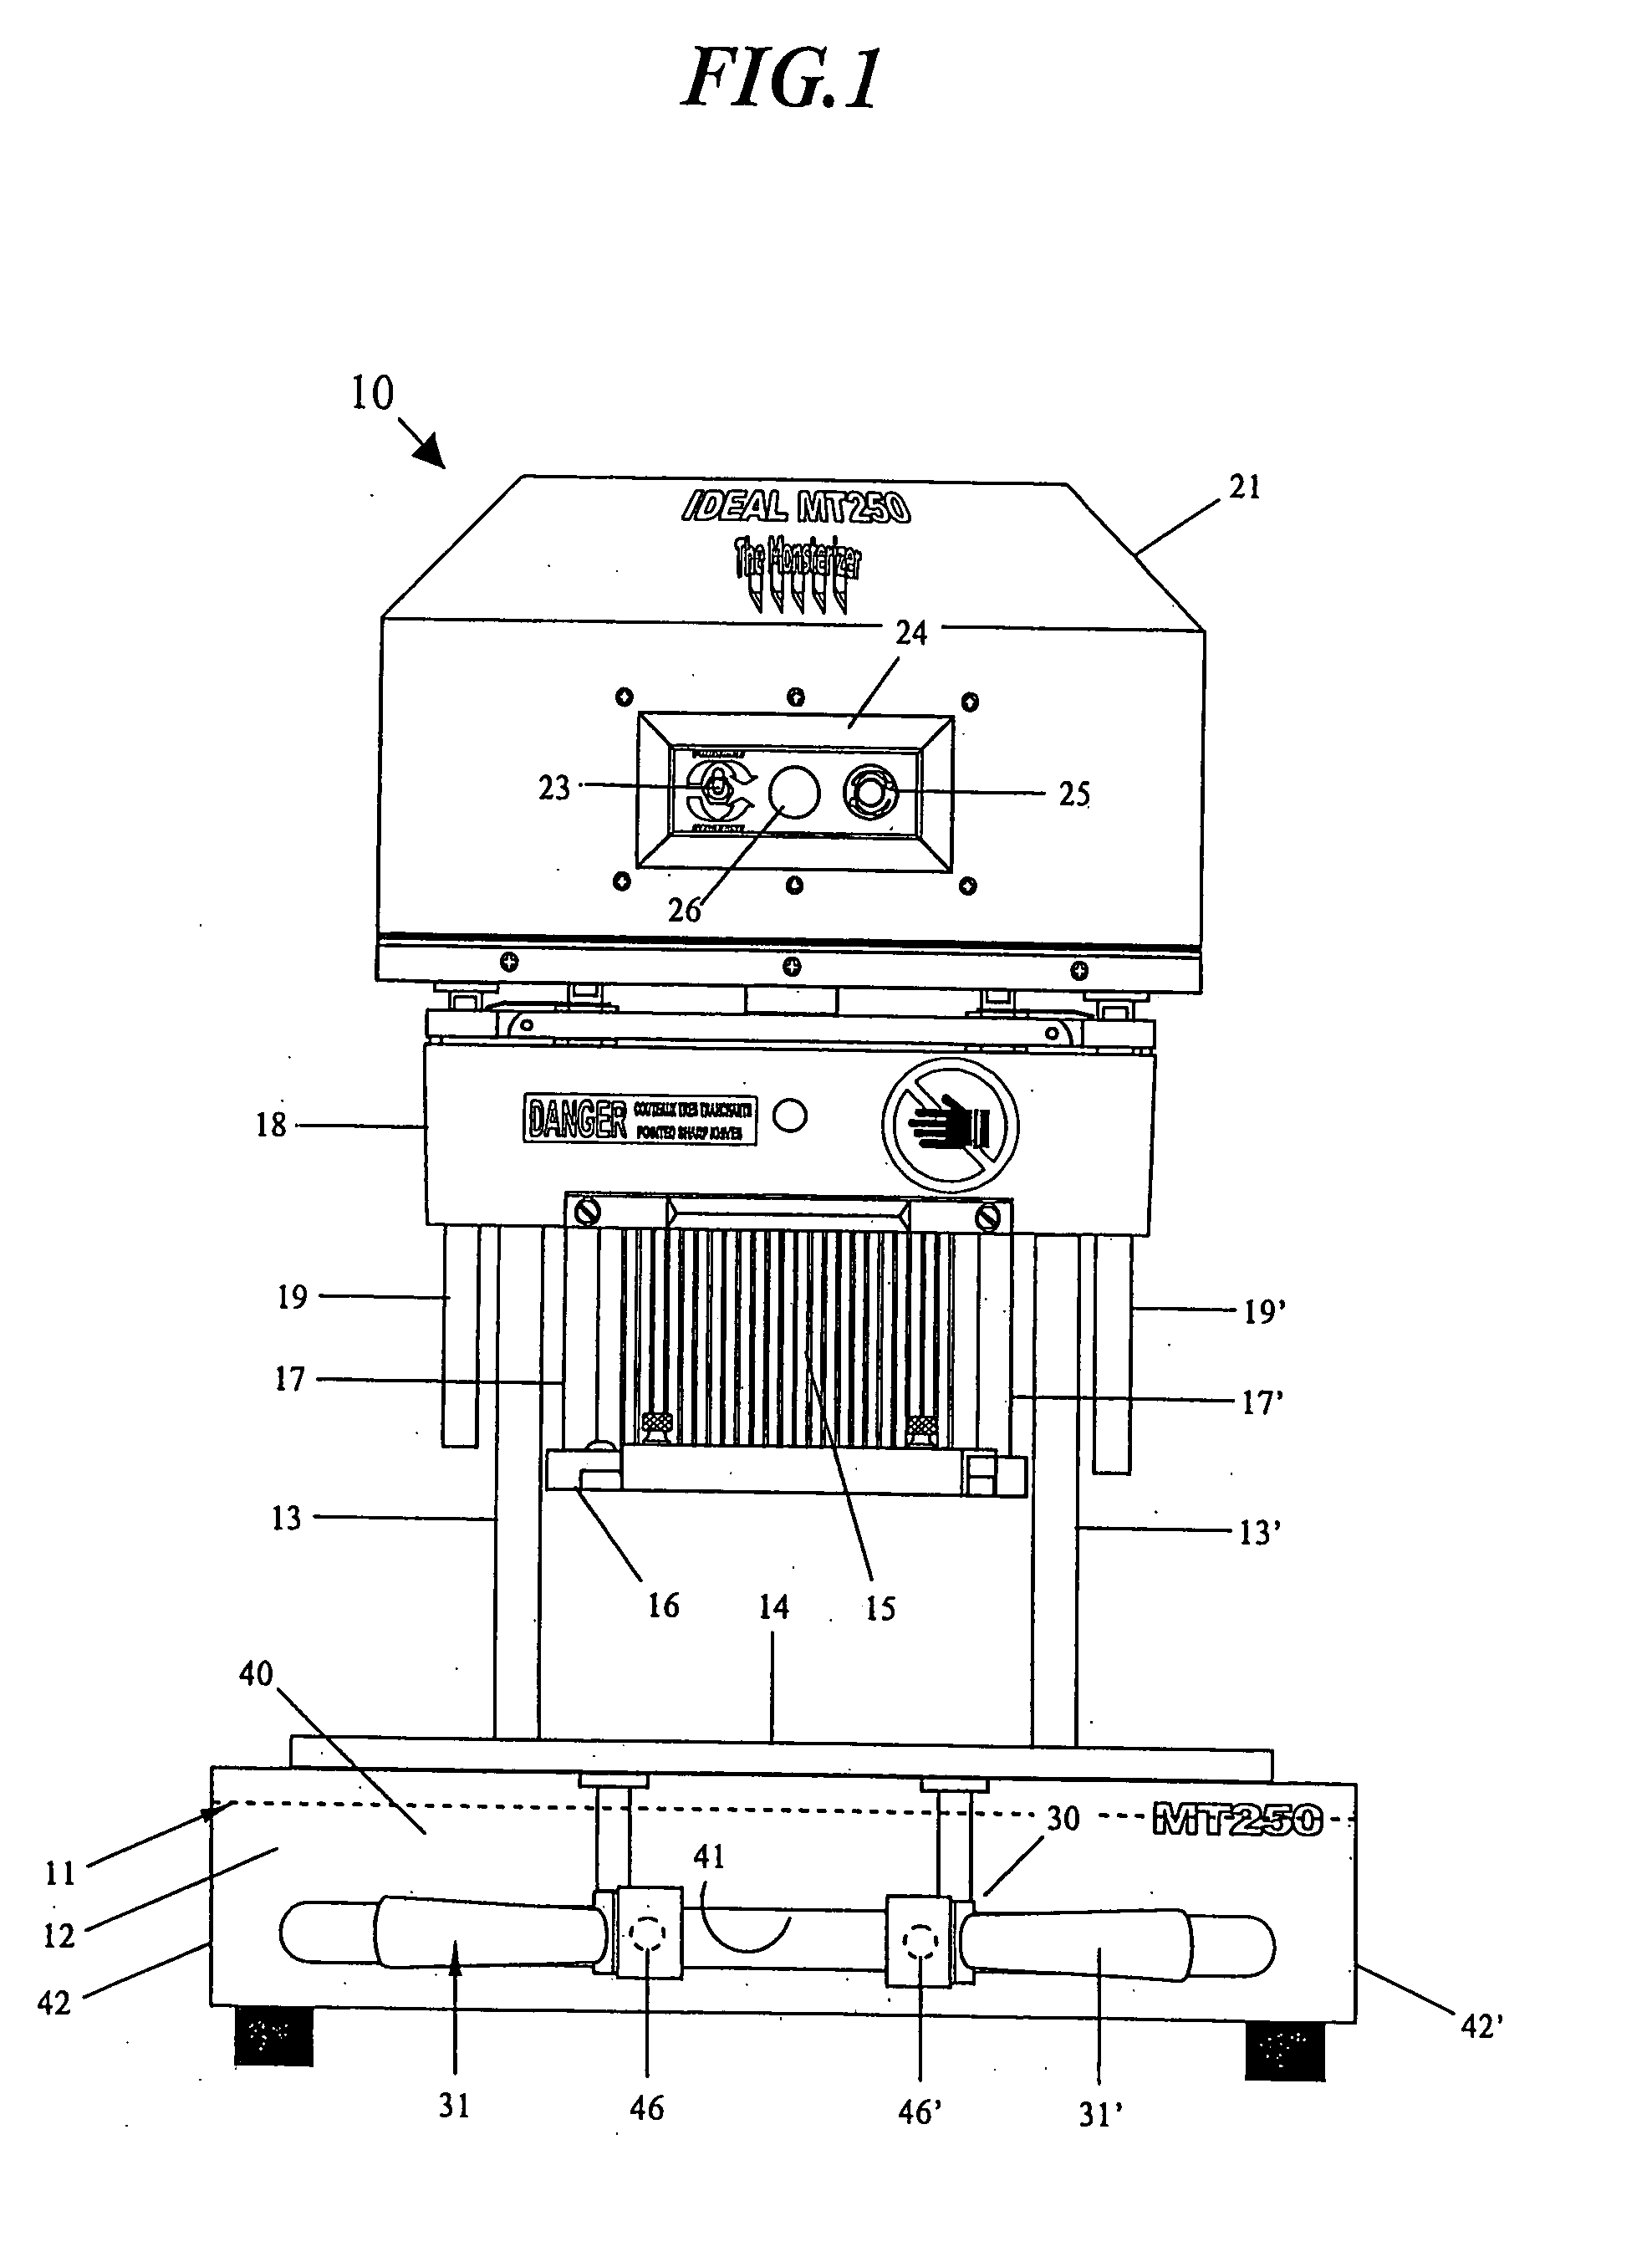 Meat tenderizing machine and method of use